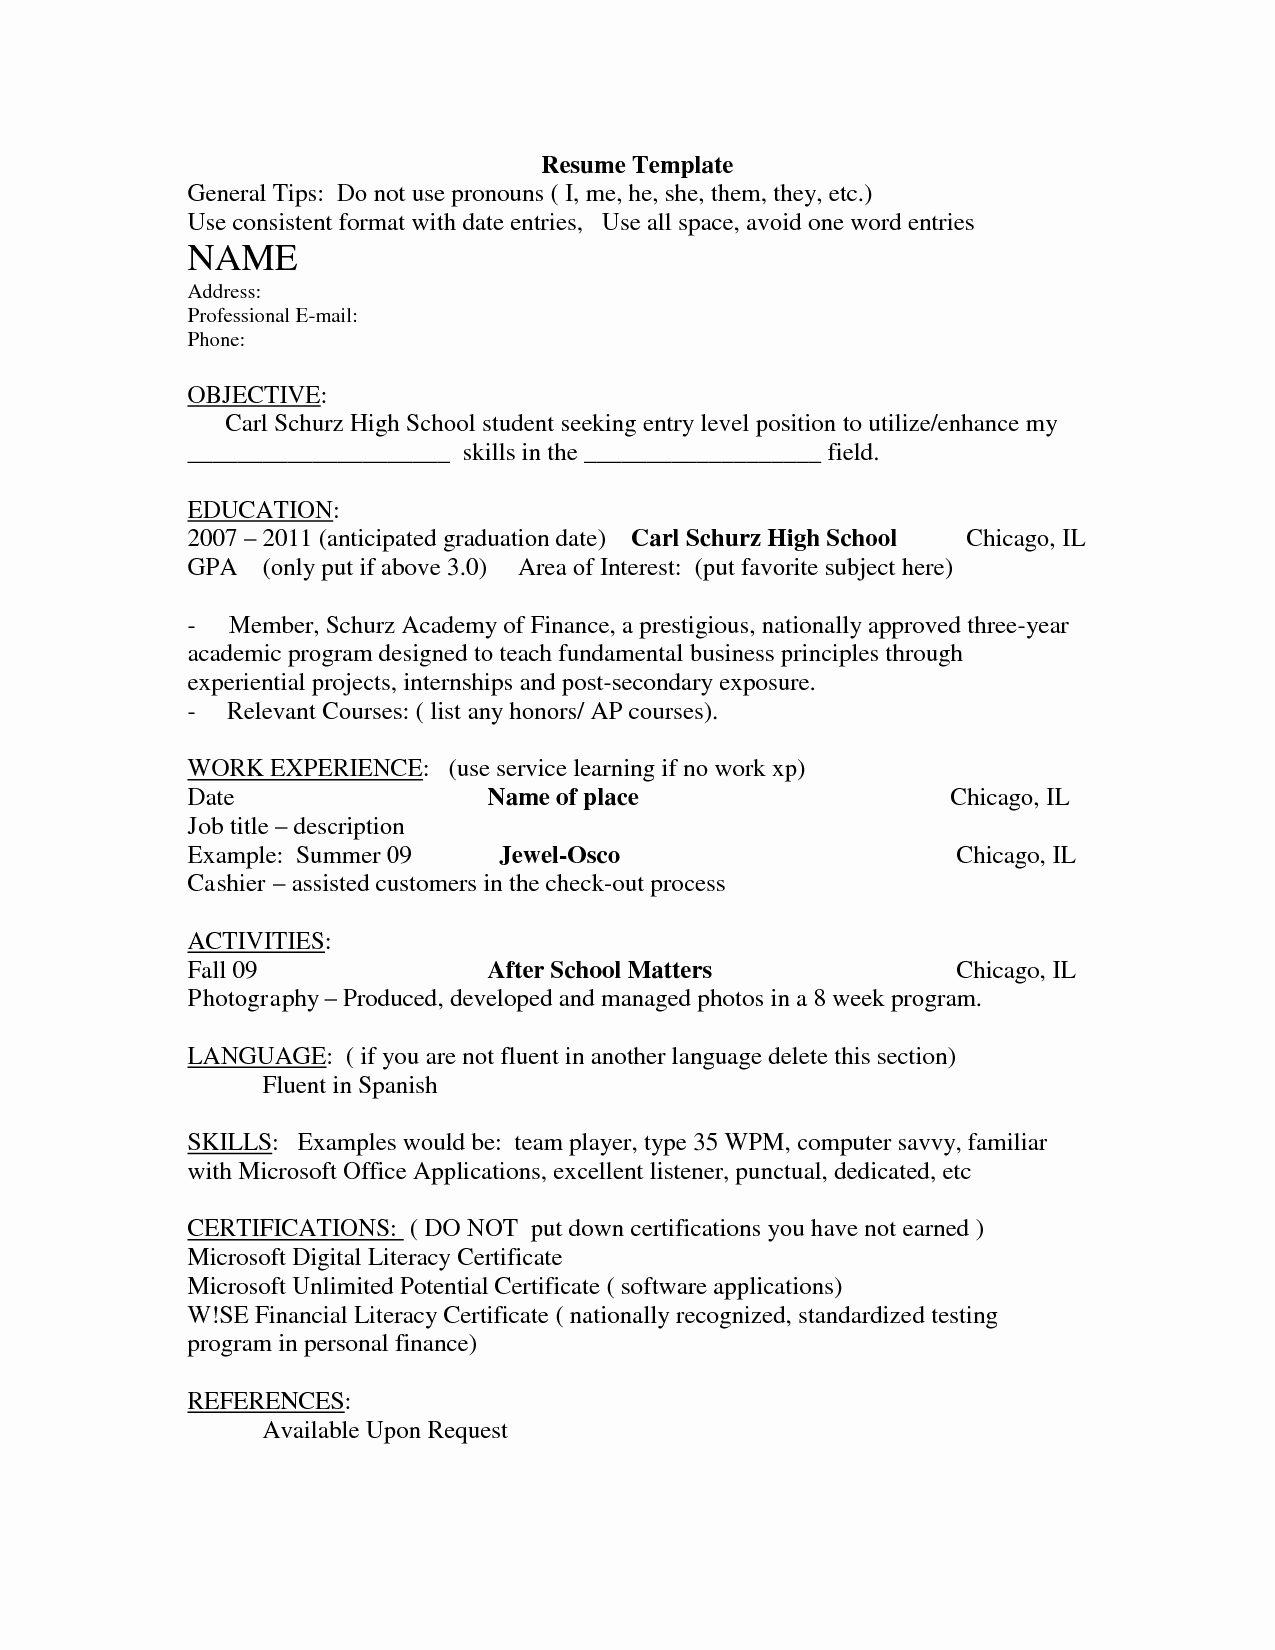 High School Student Resume Examples Awesome Resume for Non High School Graduate Resume Ideas